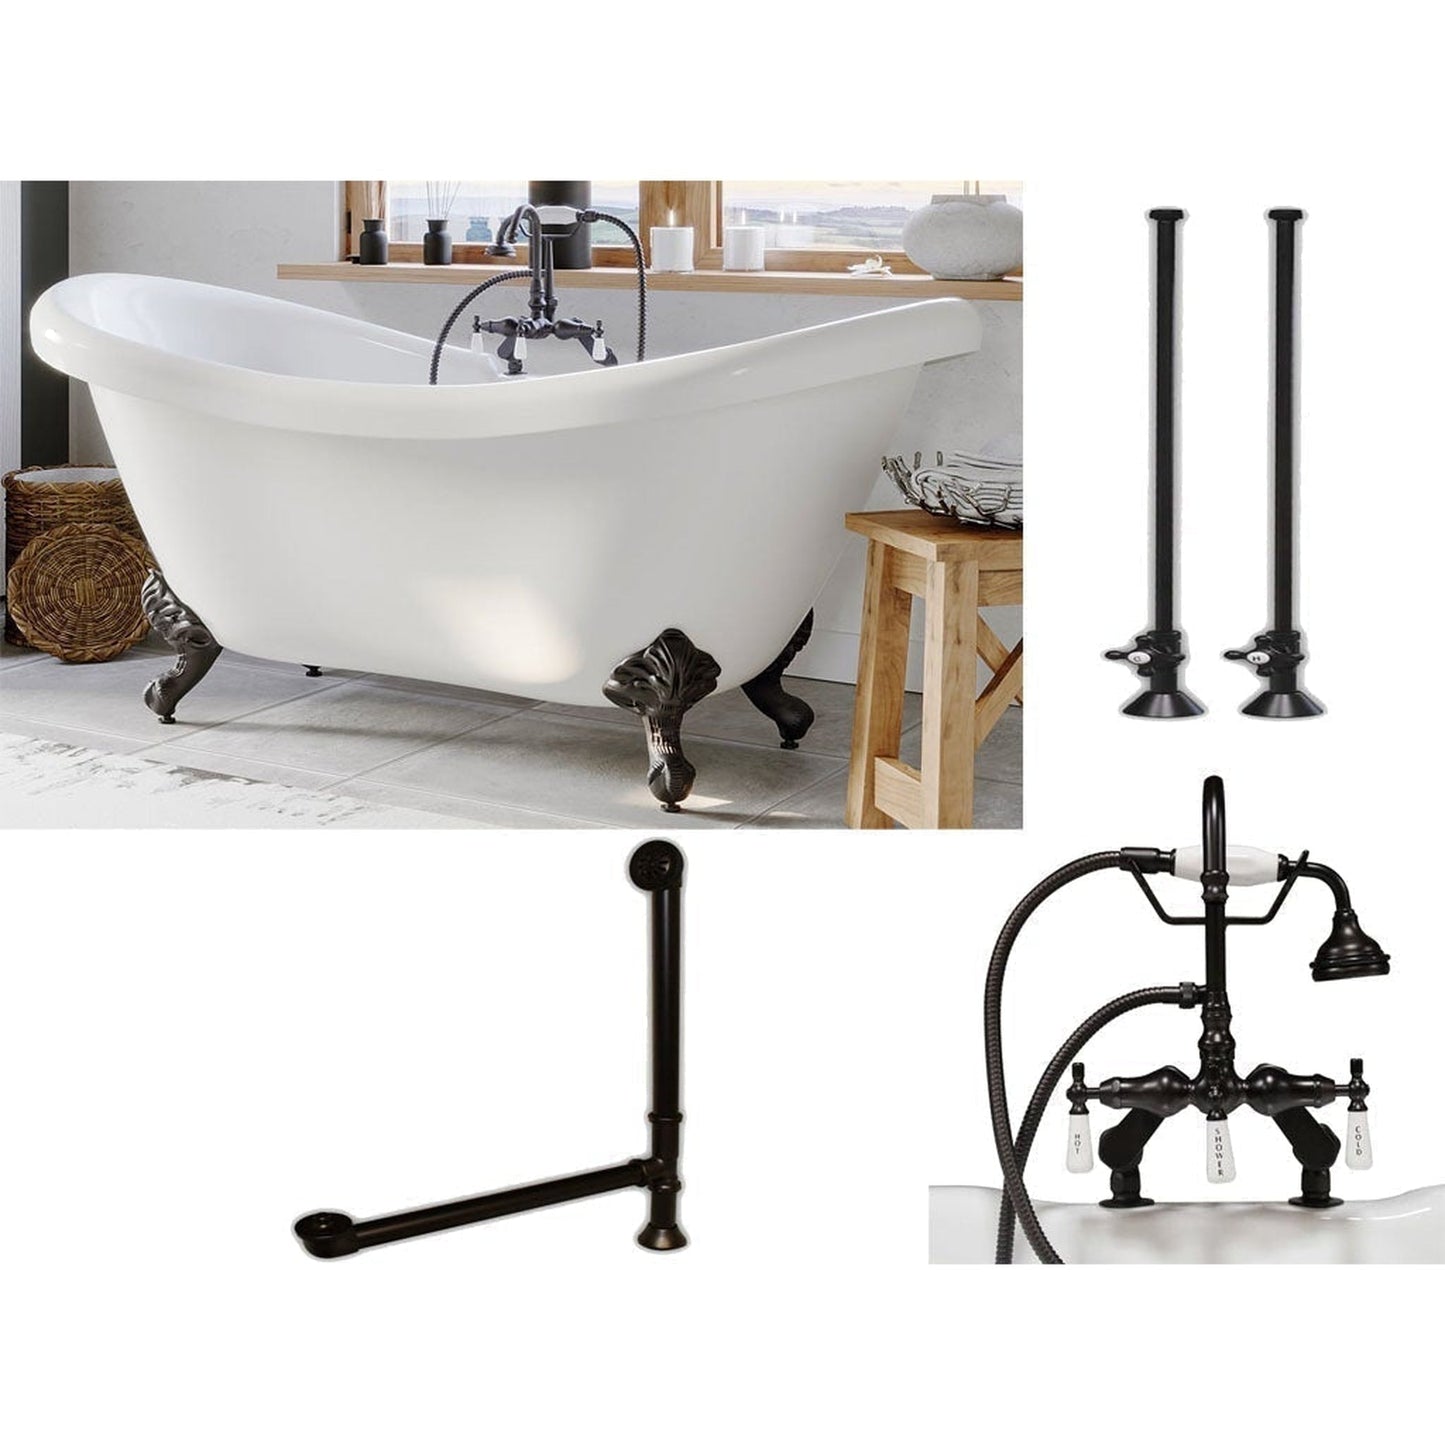 Cambridge Plumbing 69" White Acrylic Double Slipper Clawfoot Bathtub With Deck Holes And Complete Plumbing Package Including Porcelain Lever English Telephone Brass Faucet, Supply Lines, Drain And Overflow Assembly In Oil Rubbed Bronze